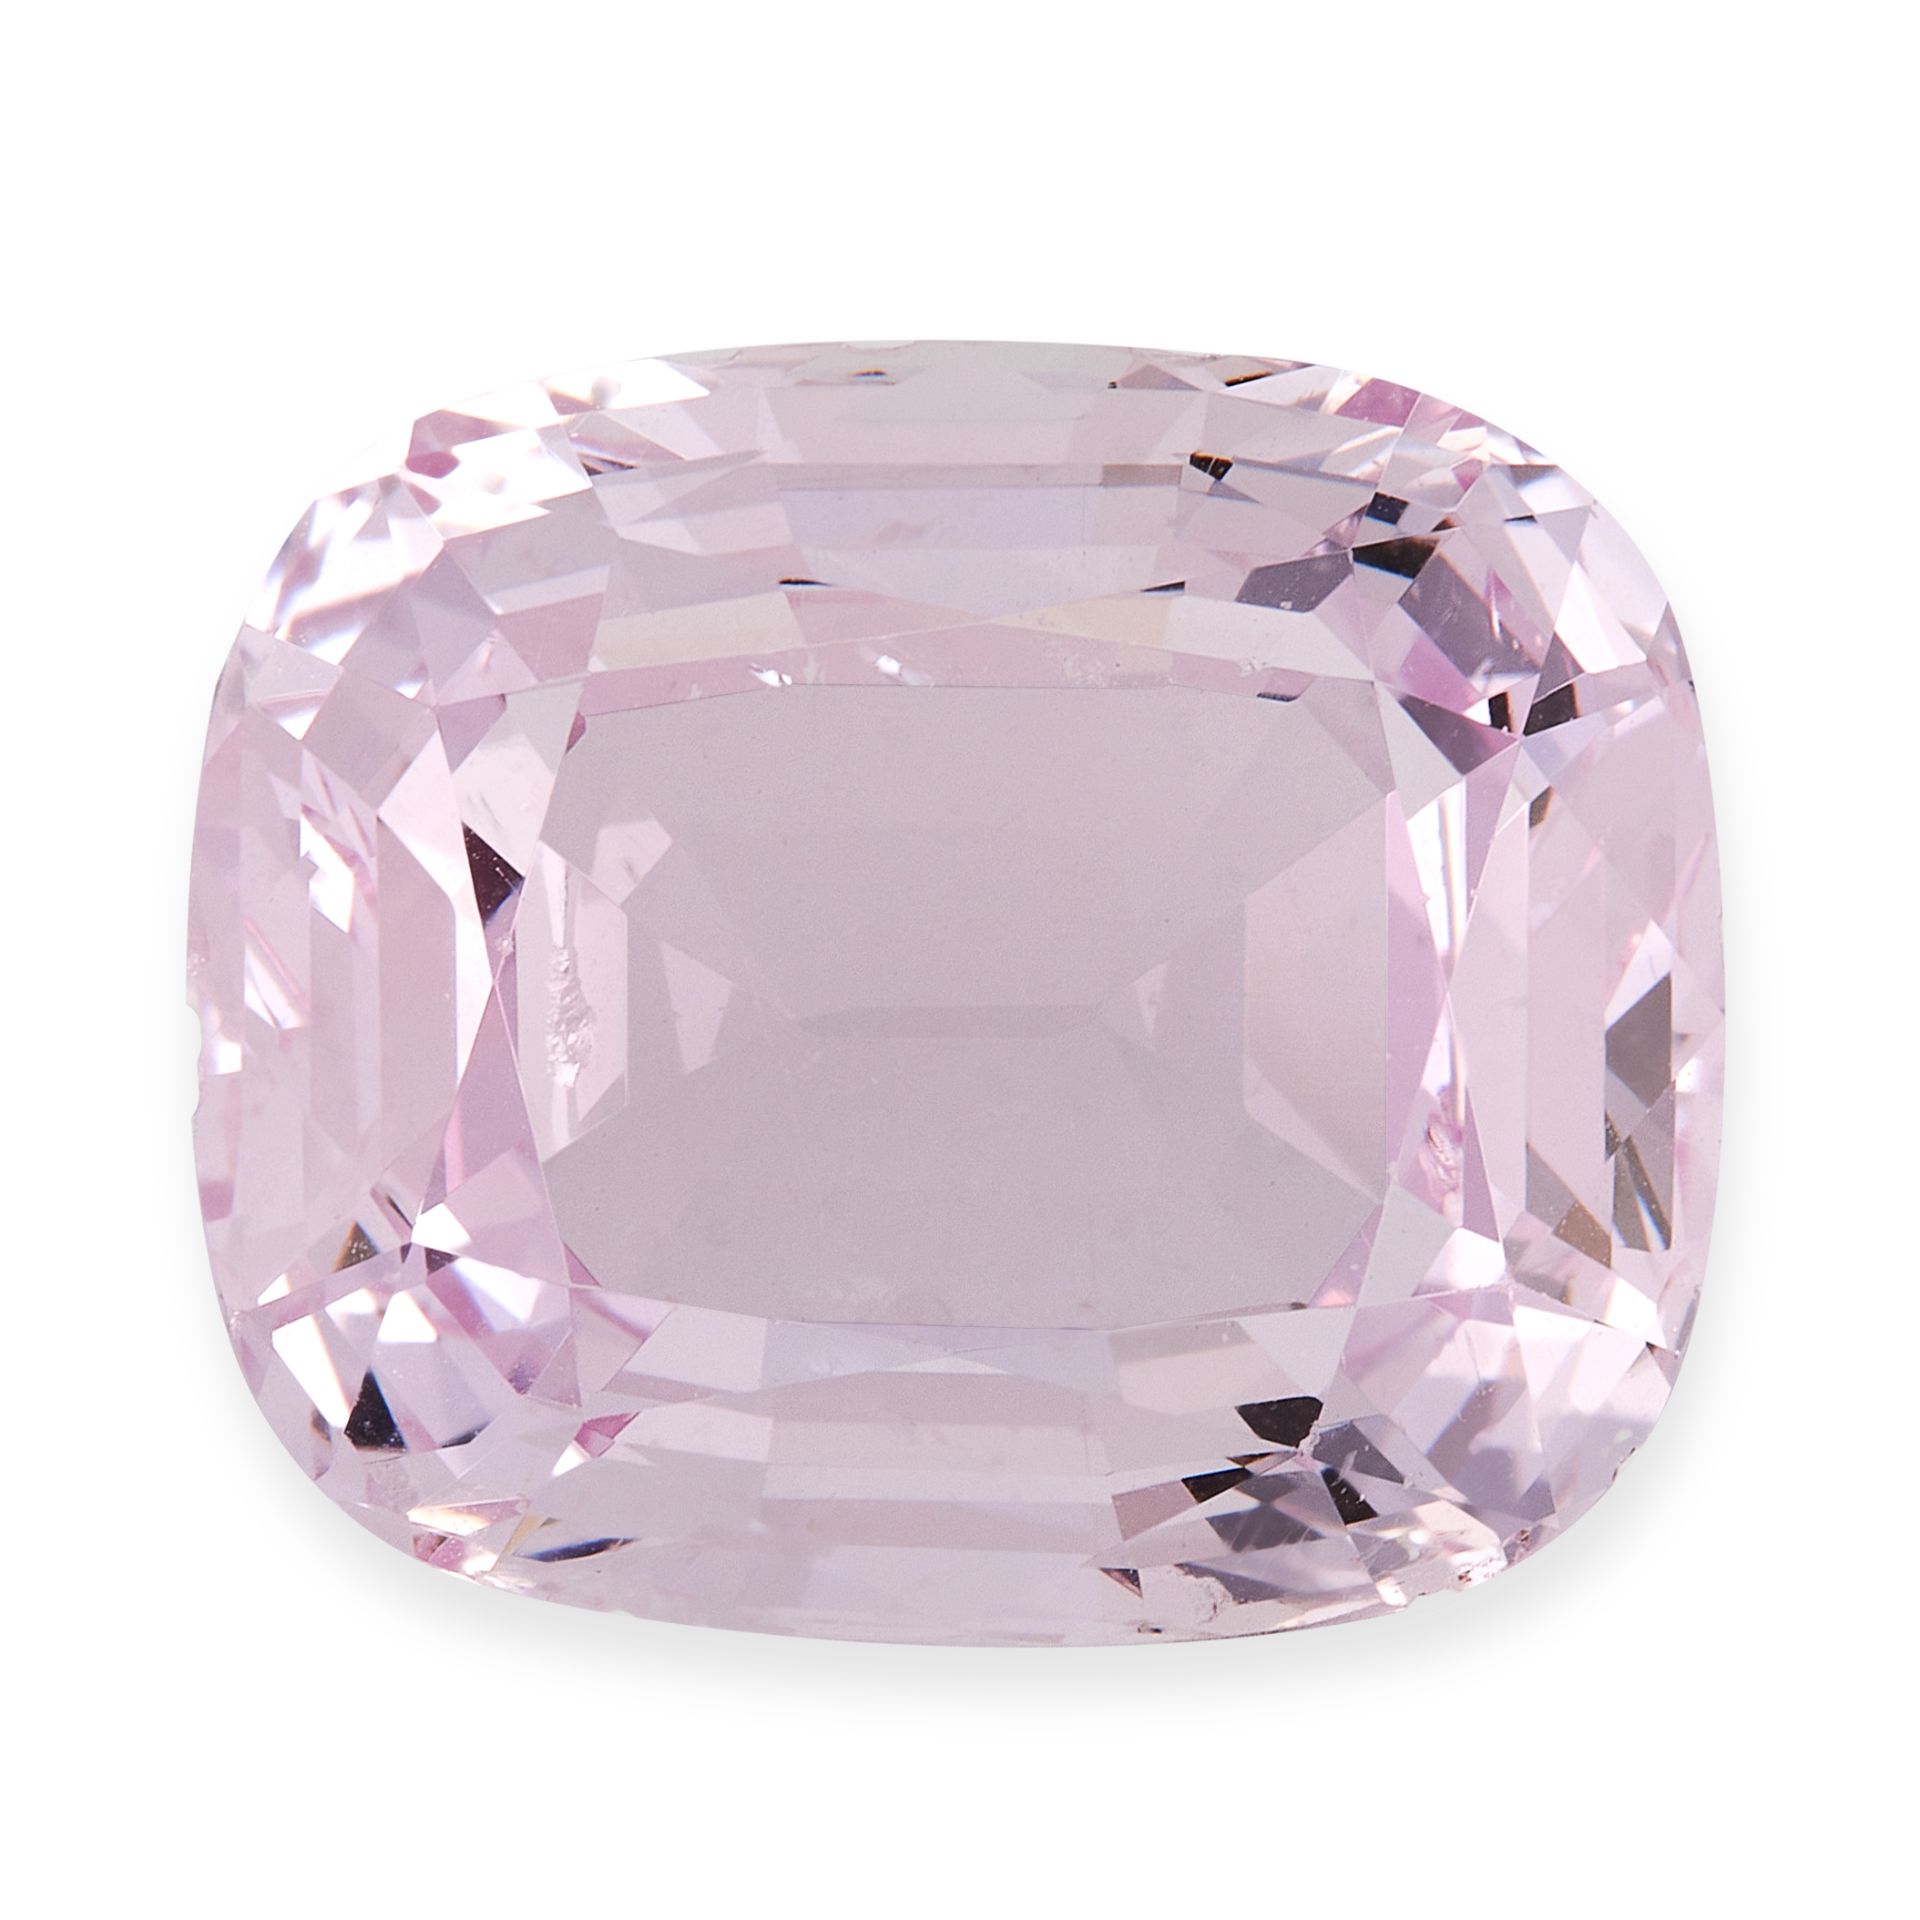 AN UNMOUNTED PINK TOPAZ of 21.35 carats, cushion cut, 17.7mm, 4.07g.